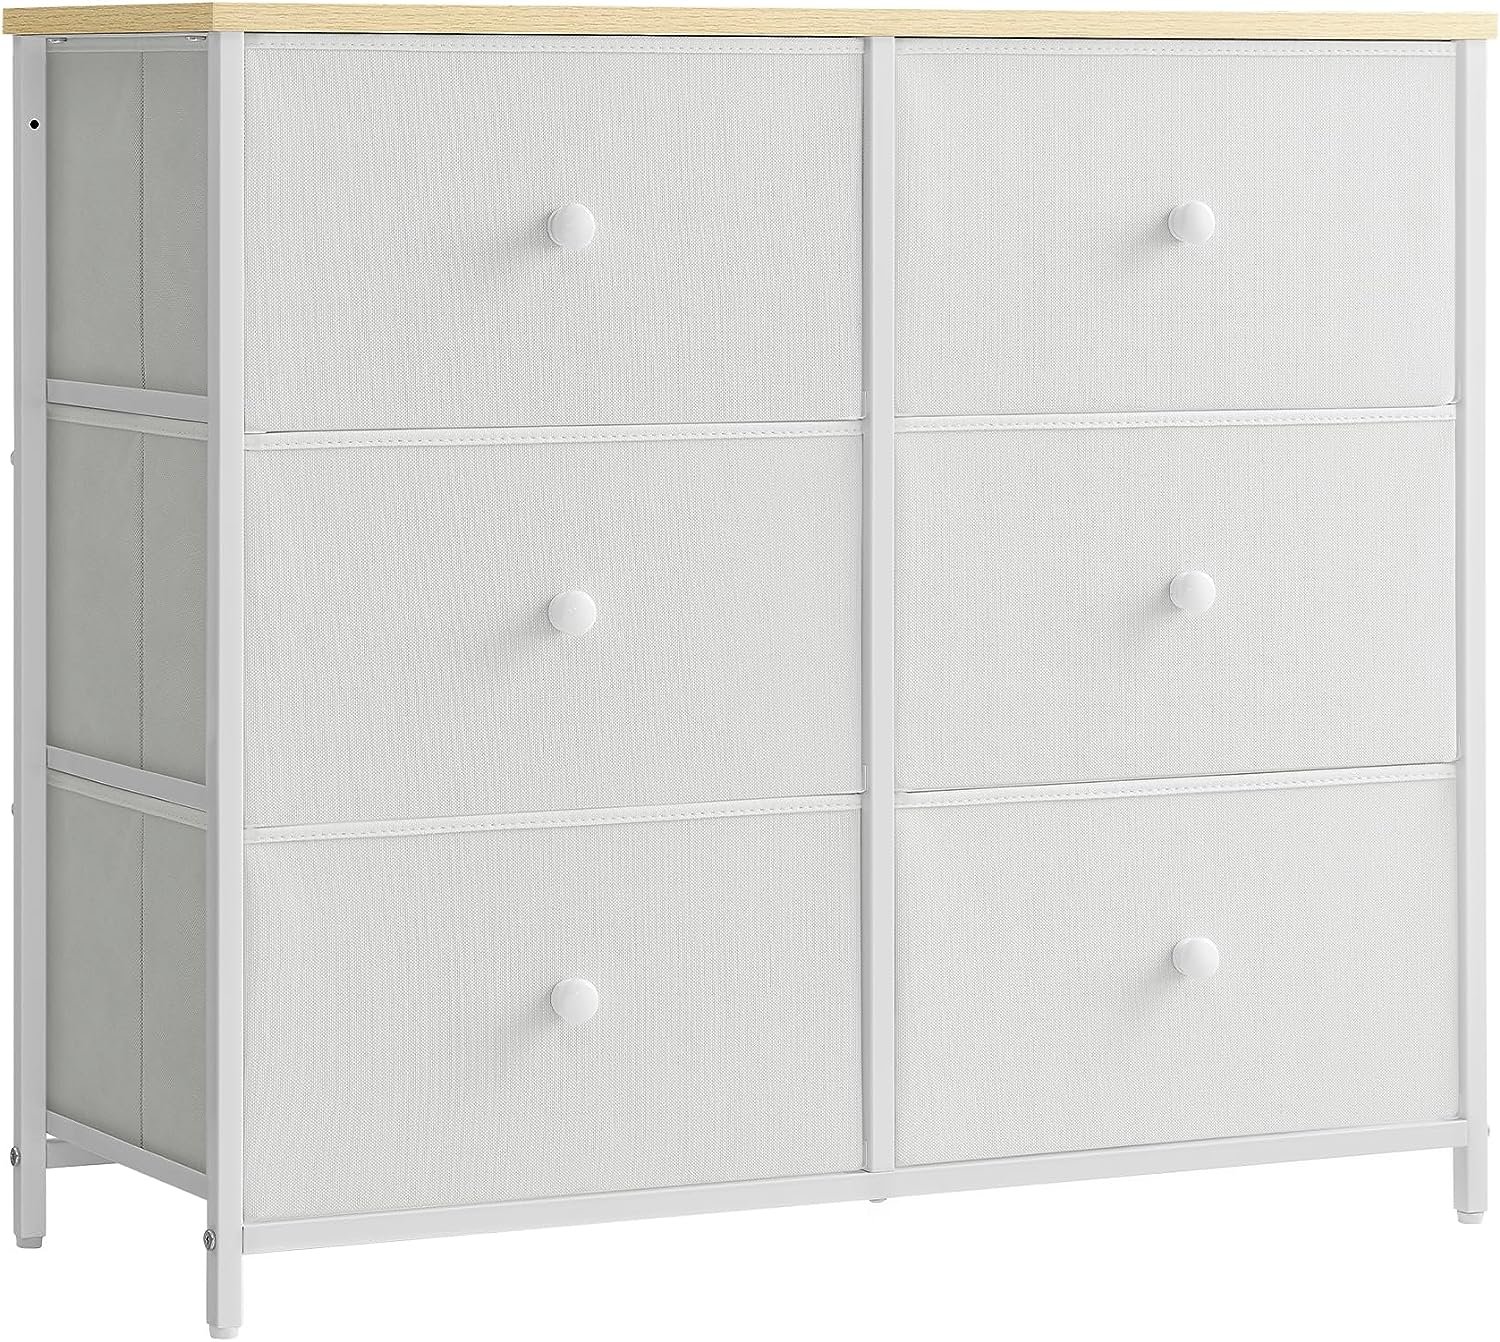 SONGMICS Bedroom, Chest, 6 Drawer, Closet Fabric Dresser with Metal Frame, 11.8”D x 31.5”W x 27.1”H, White